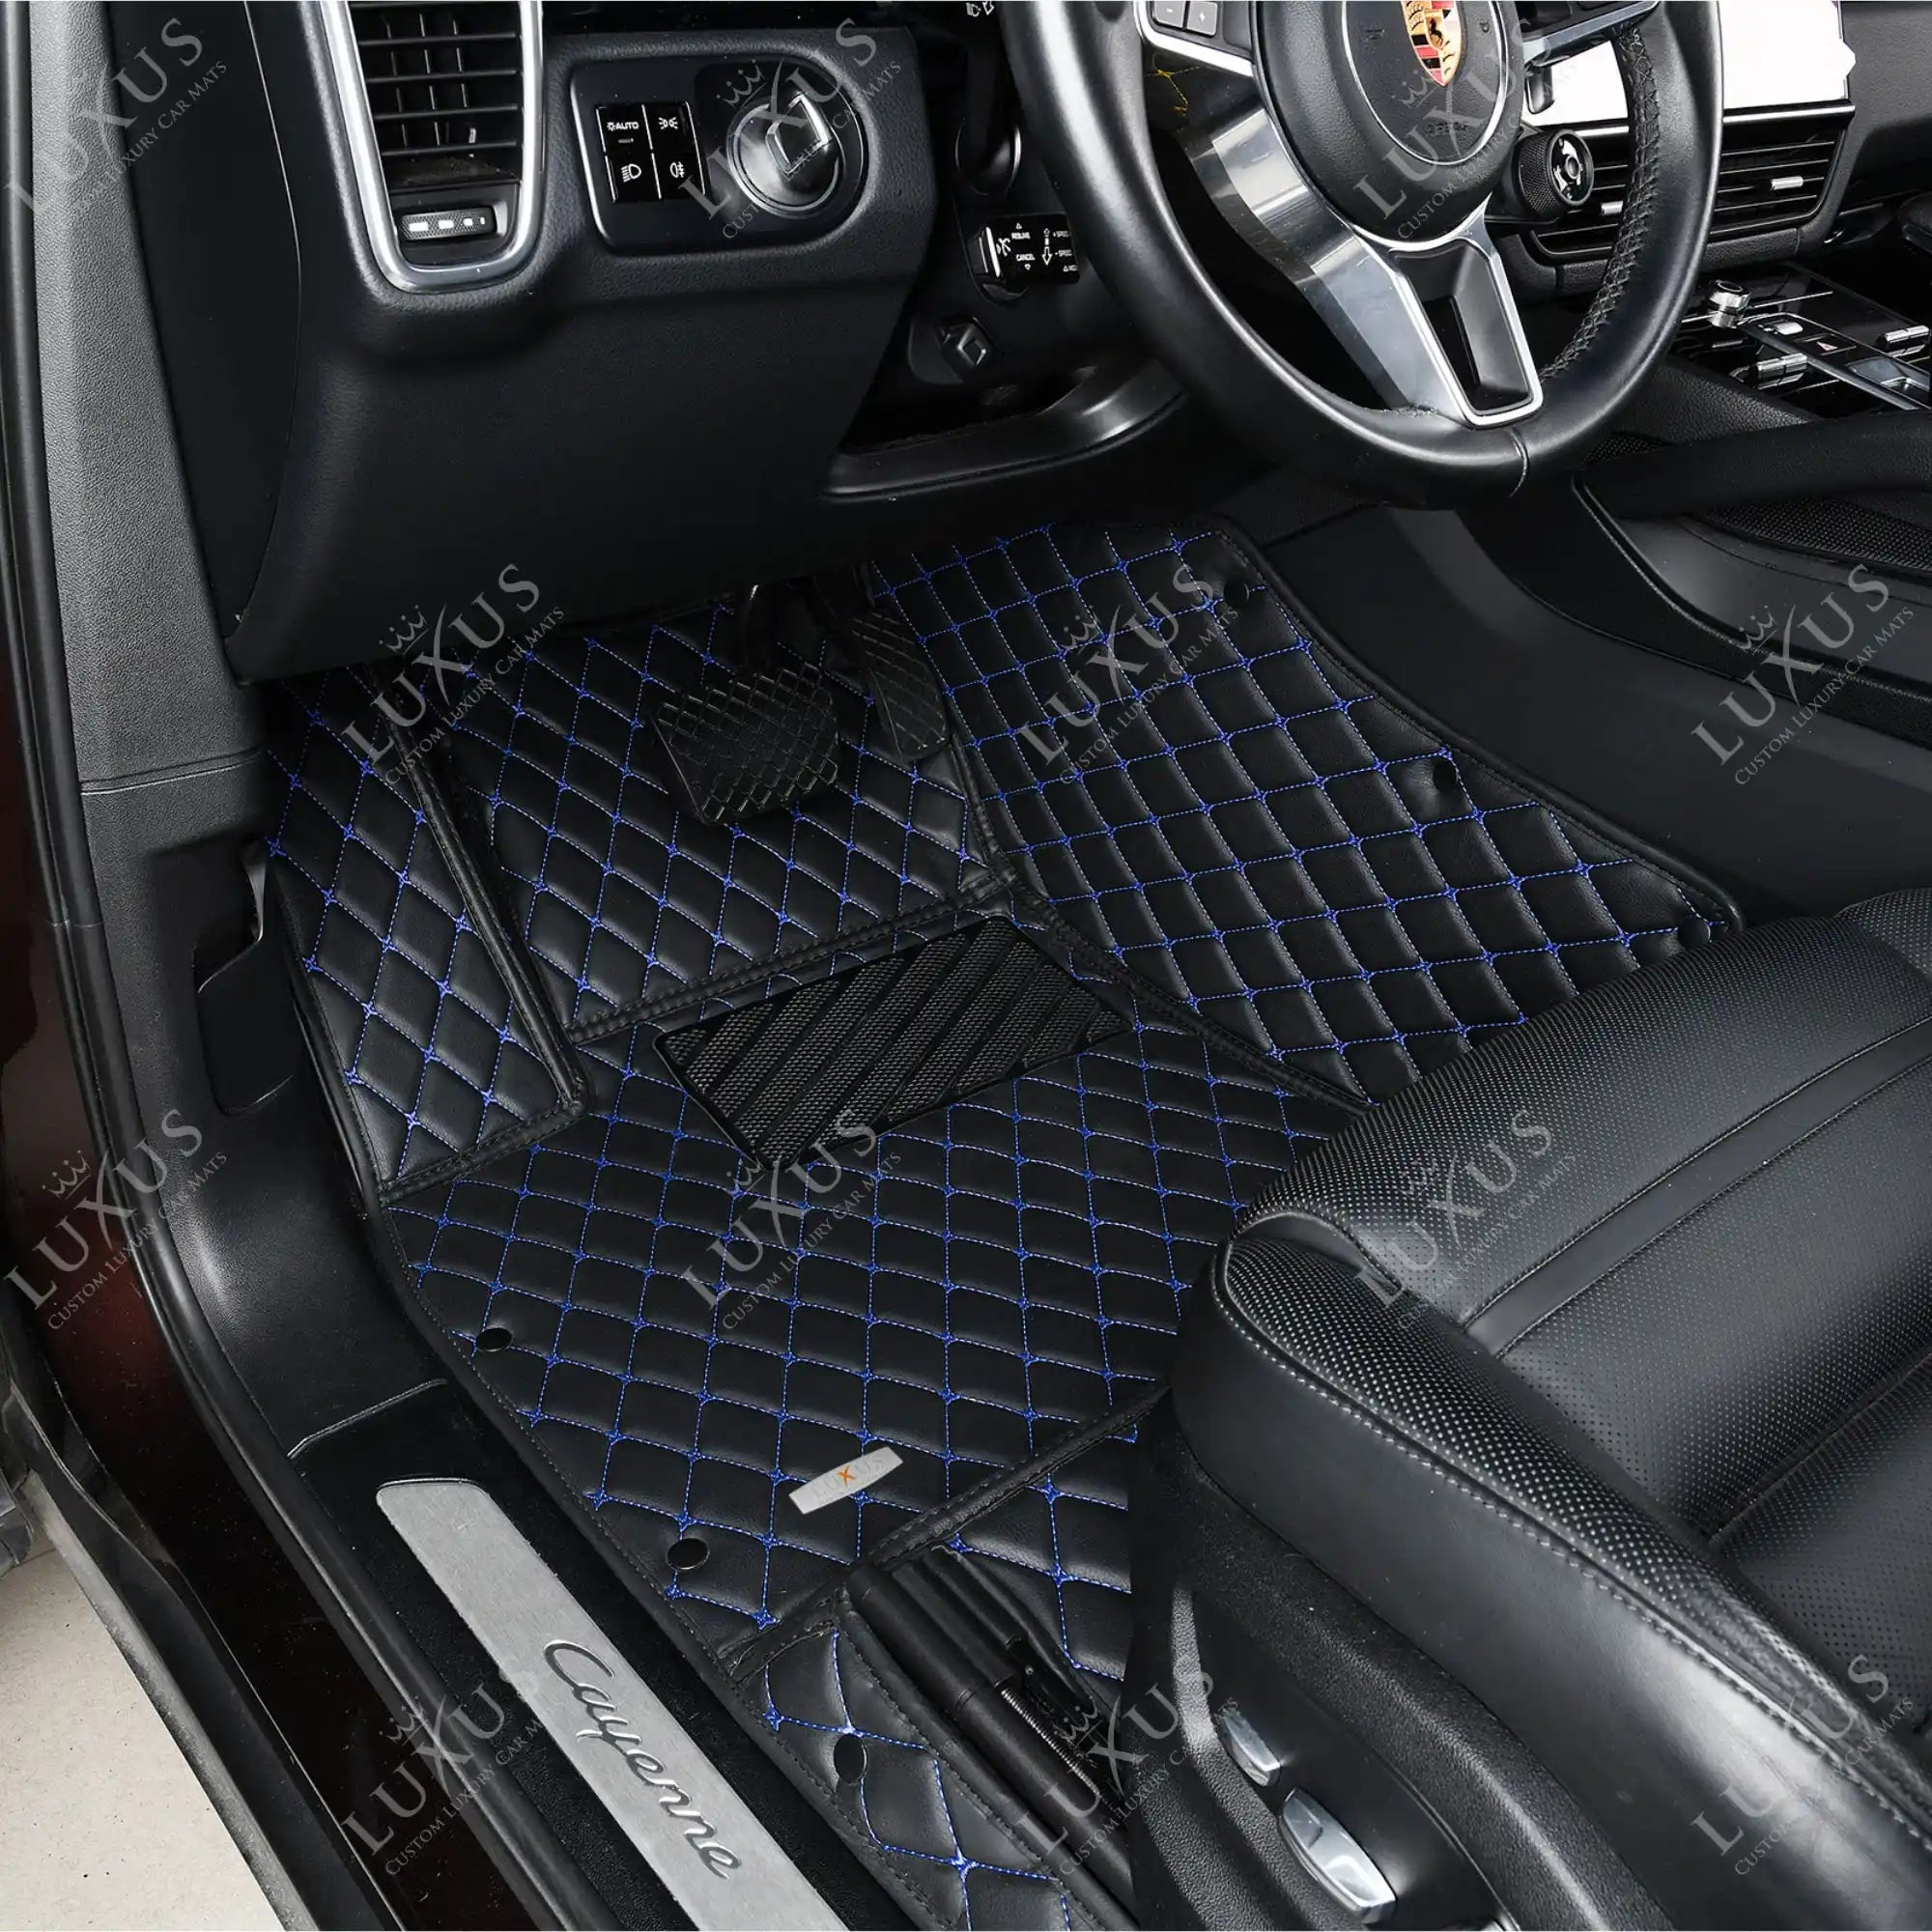 Custom Car Boot Mats and Liners, Free UK Delivery